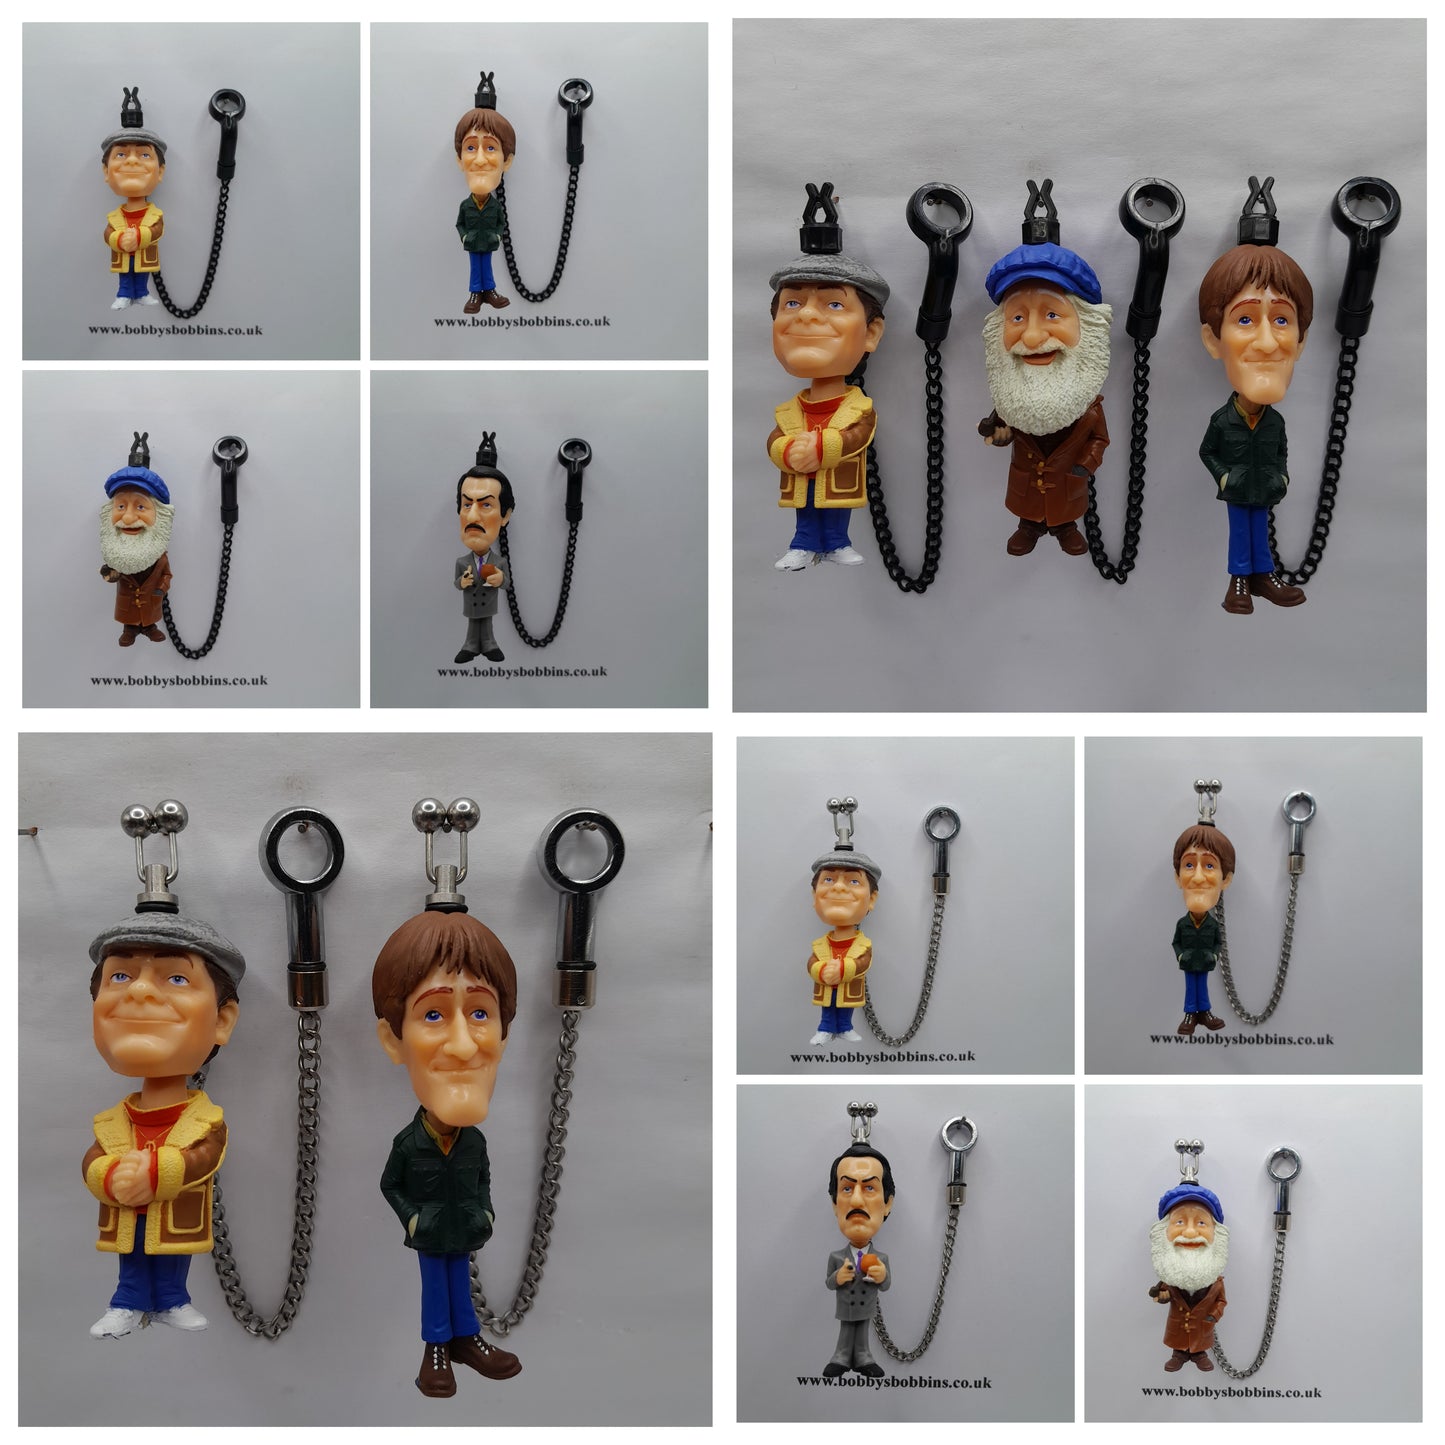 Only Fools And Horses Full Body Bobbin (Design 1)  Delboy, Del boy, Rodney, Uncle Albert And Boycie. With Stainless Or Black Chains